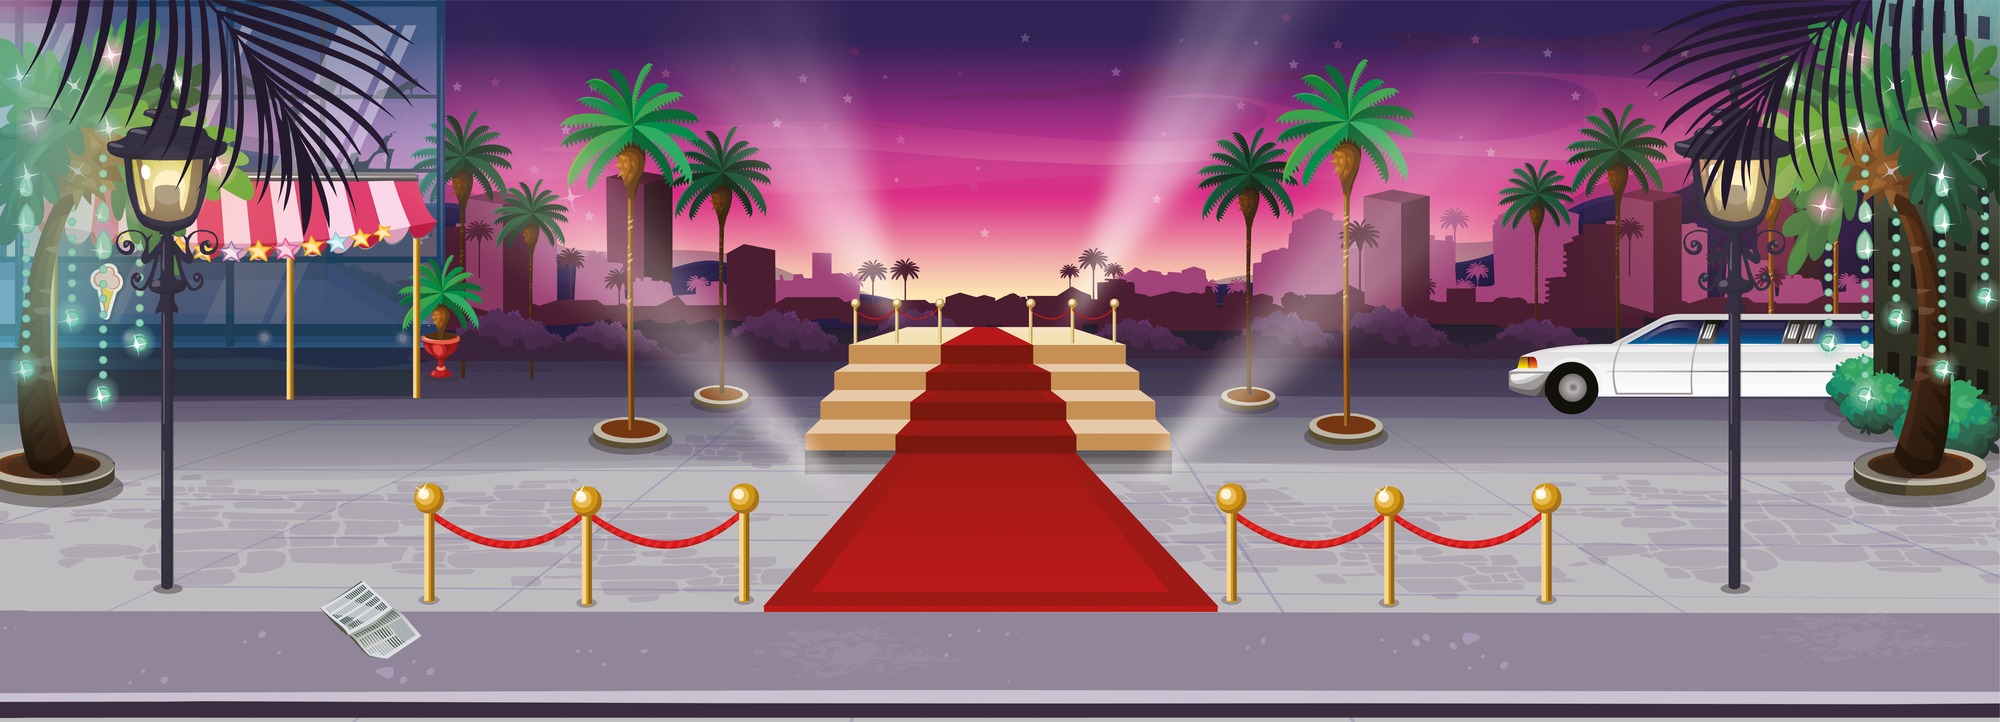 The Red Carpet Landscape Wall Mural Wallsauce